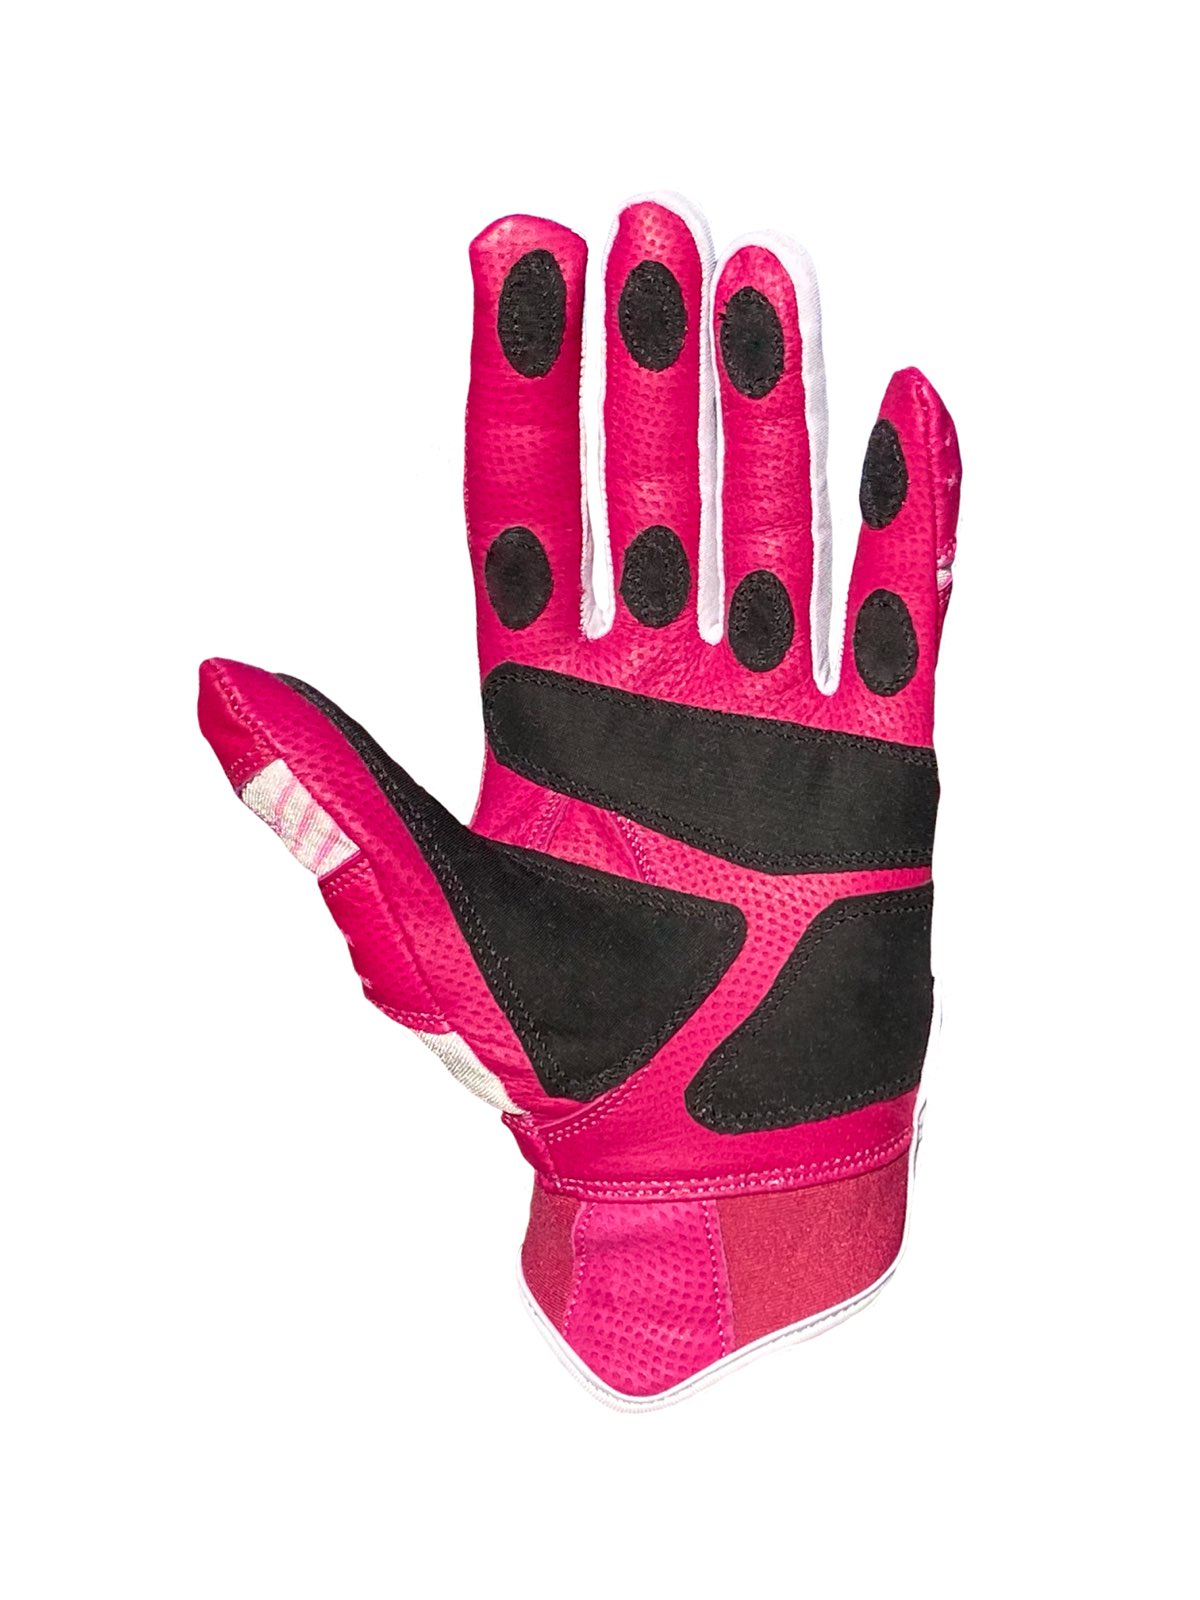 VukGripz Prowler Pink Baseball and Softball Batting Gloves with Black Grip Material